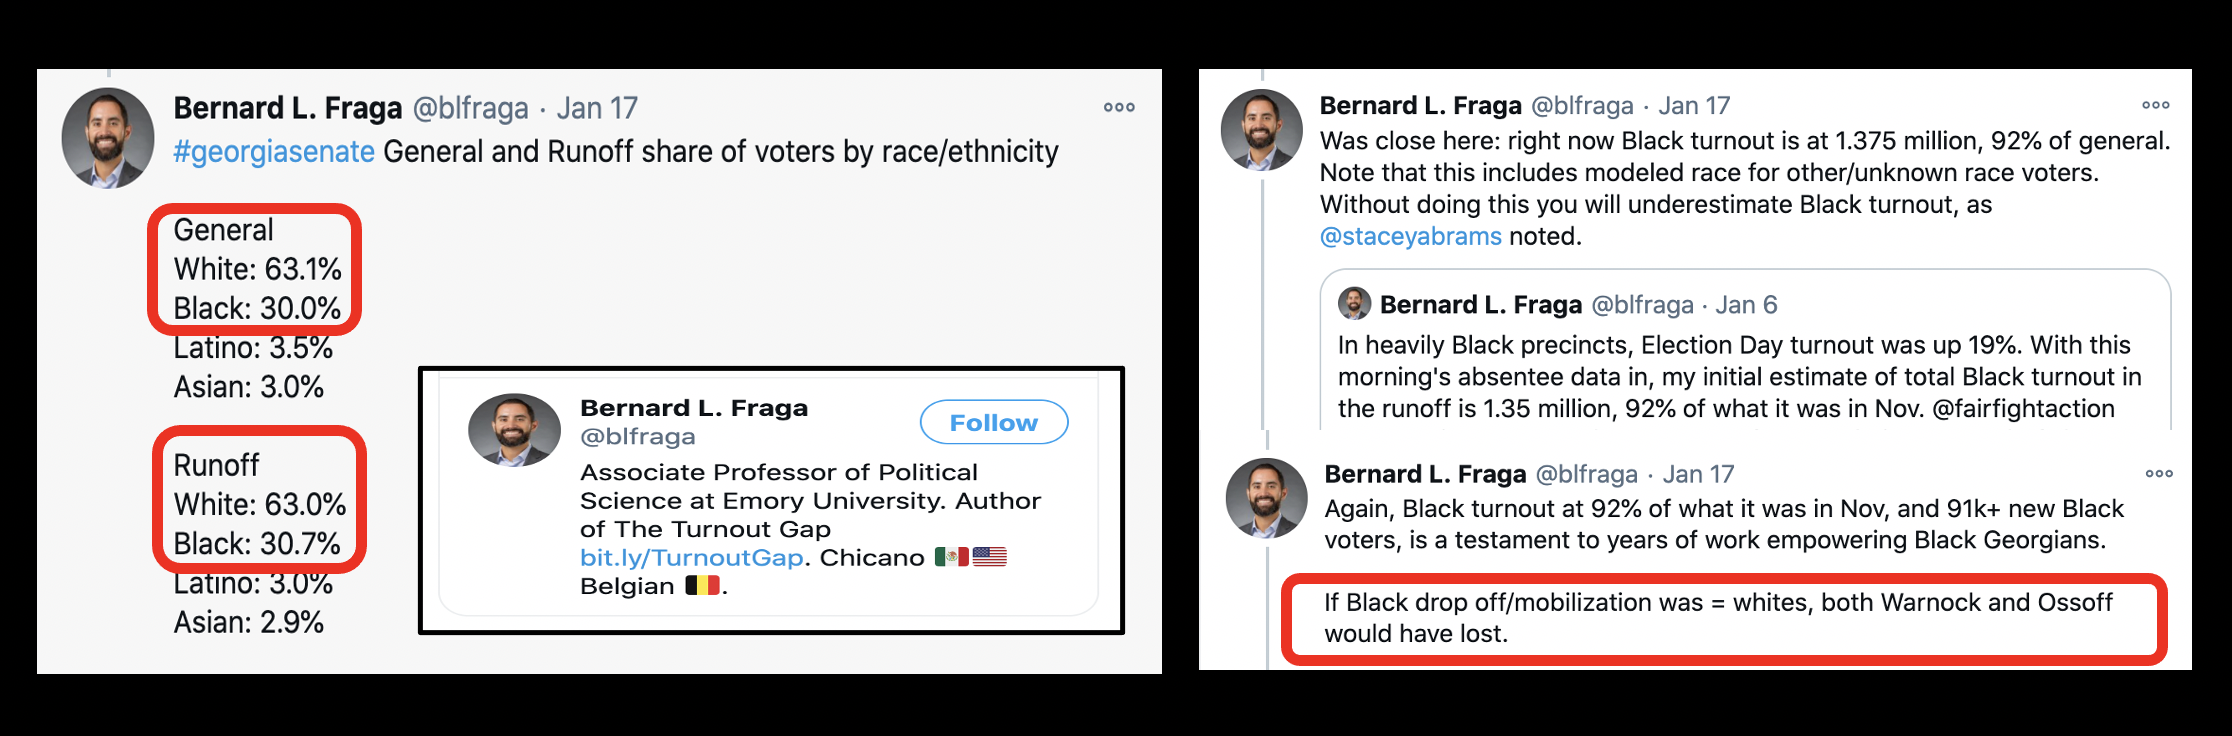 Research by Assoc. Professor Bernard Fraga shows how critical Black voter turnout was in the election of Warnock and Ossoff